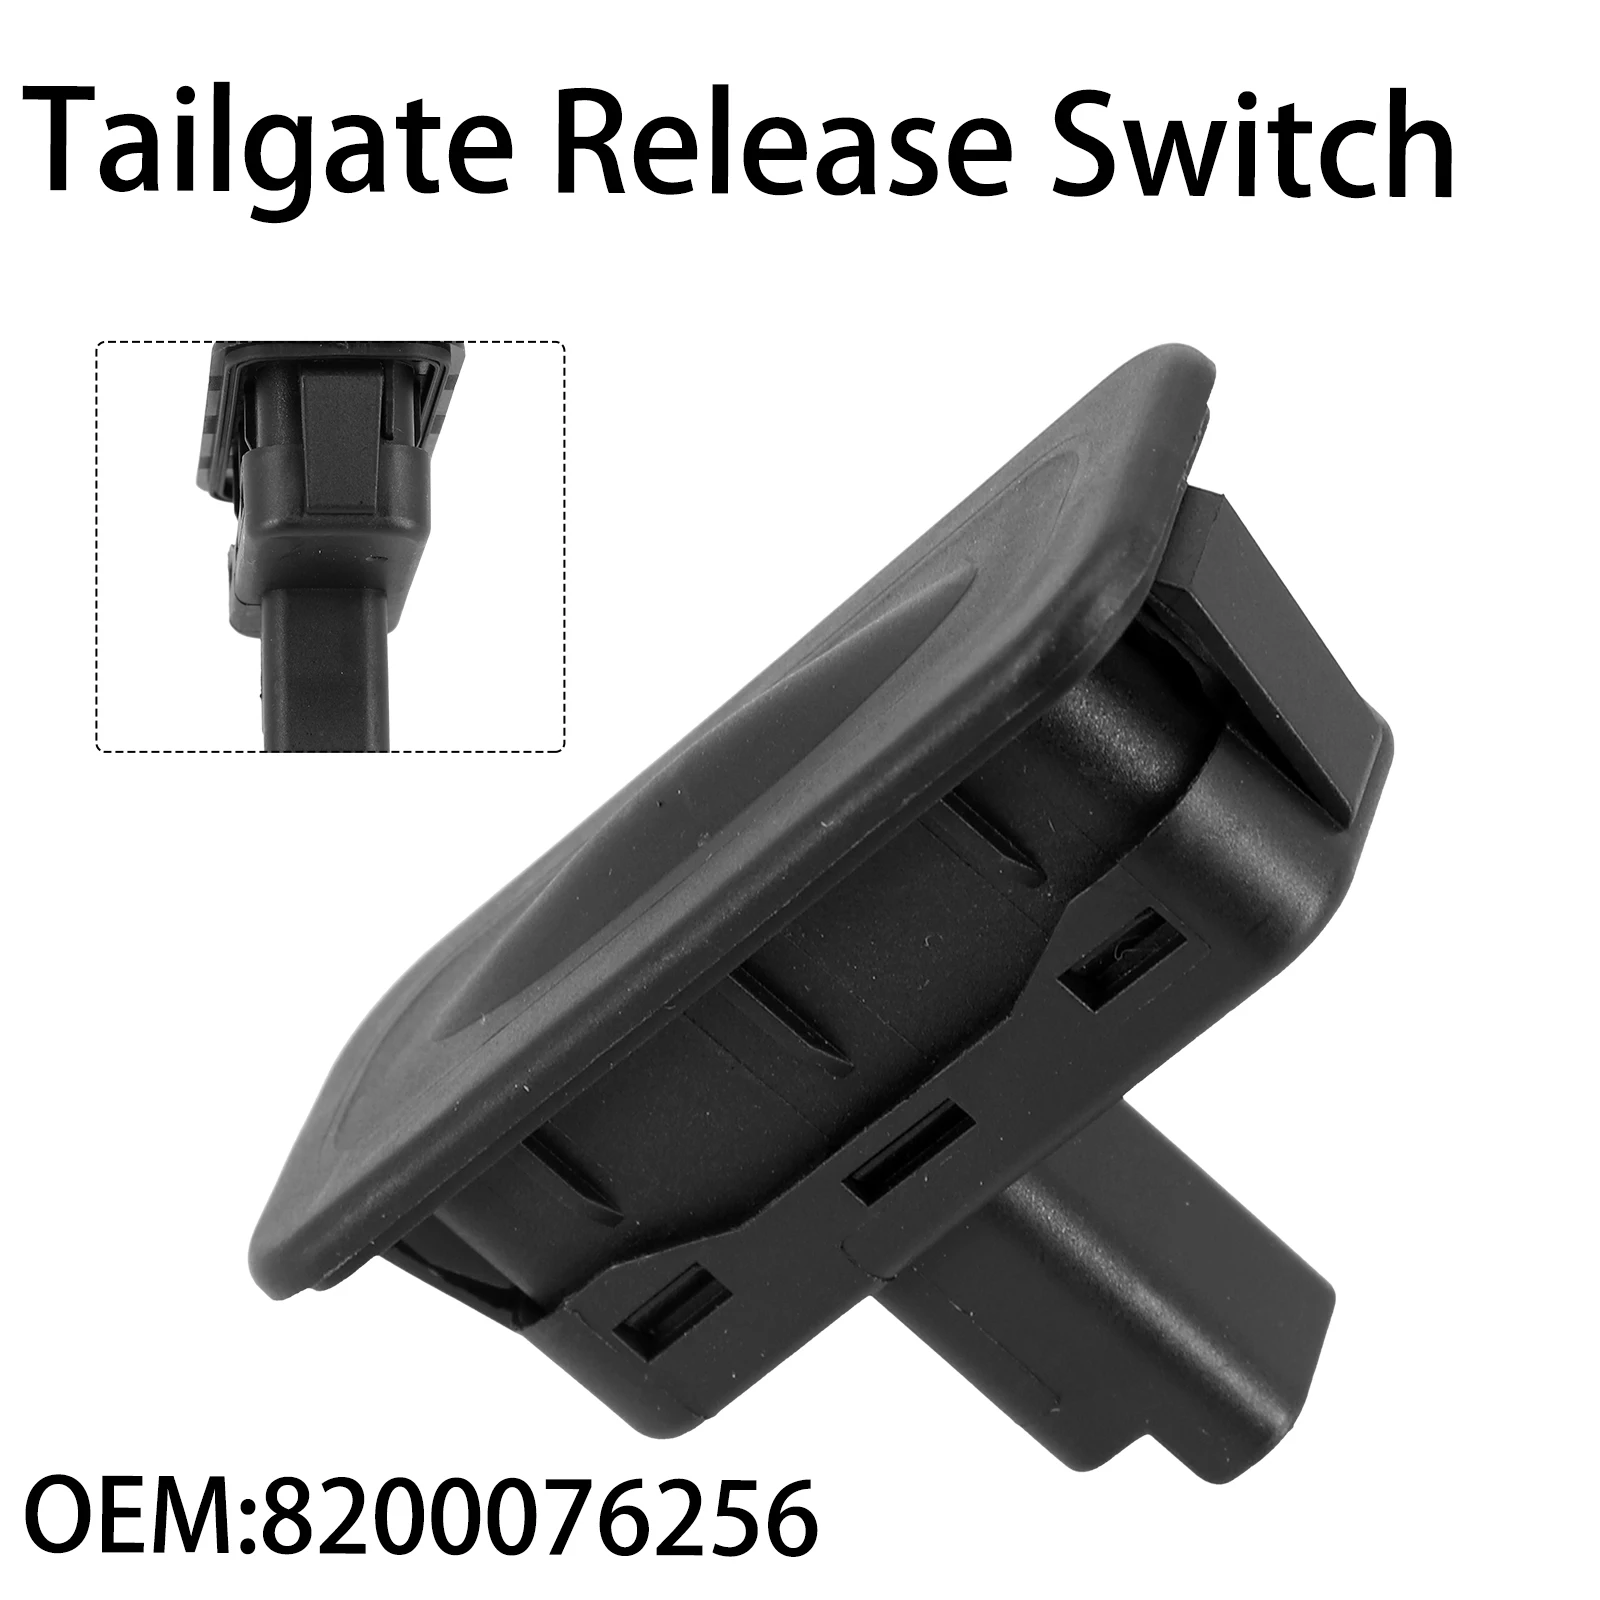 

Switch Tailgate Handle Rear Replacement Trigger Vehicle 12 V 1pcs 2 Pins 8200076256 Black Boot Parts Plastic